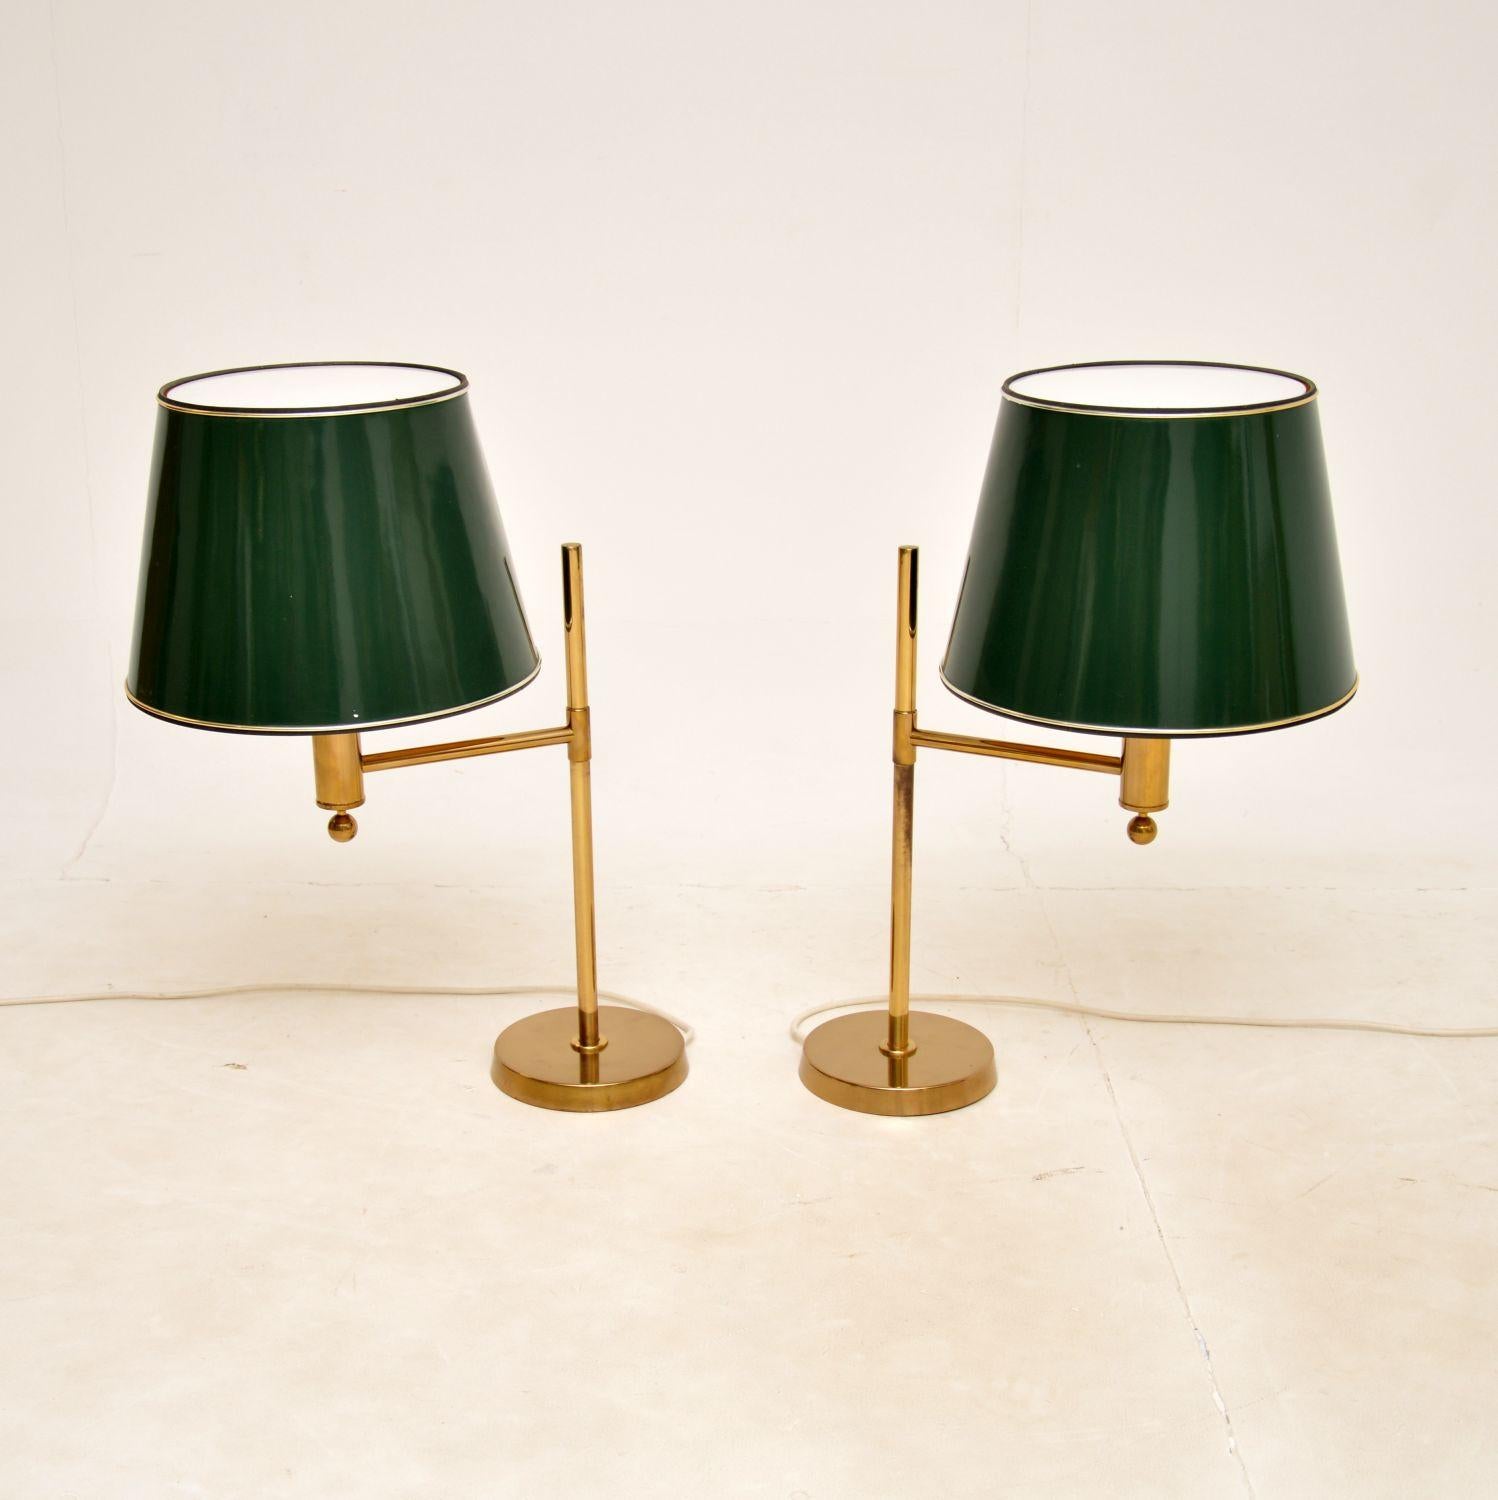 A fantastic pair of vintage table lamps, made in Sweden by Bergboms and dating from around the 1970-80’s.

They are a great size, very large and impressive for table lamps, the quality is outstanding. They have original green shades with removable